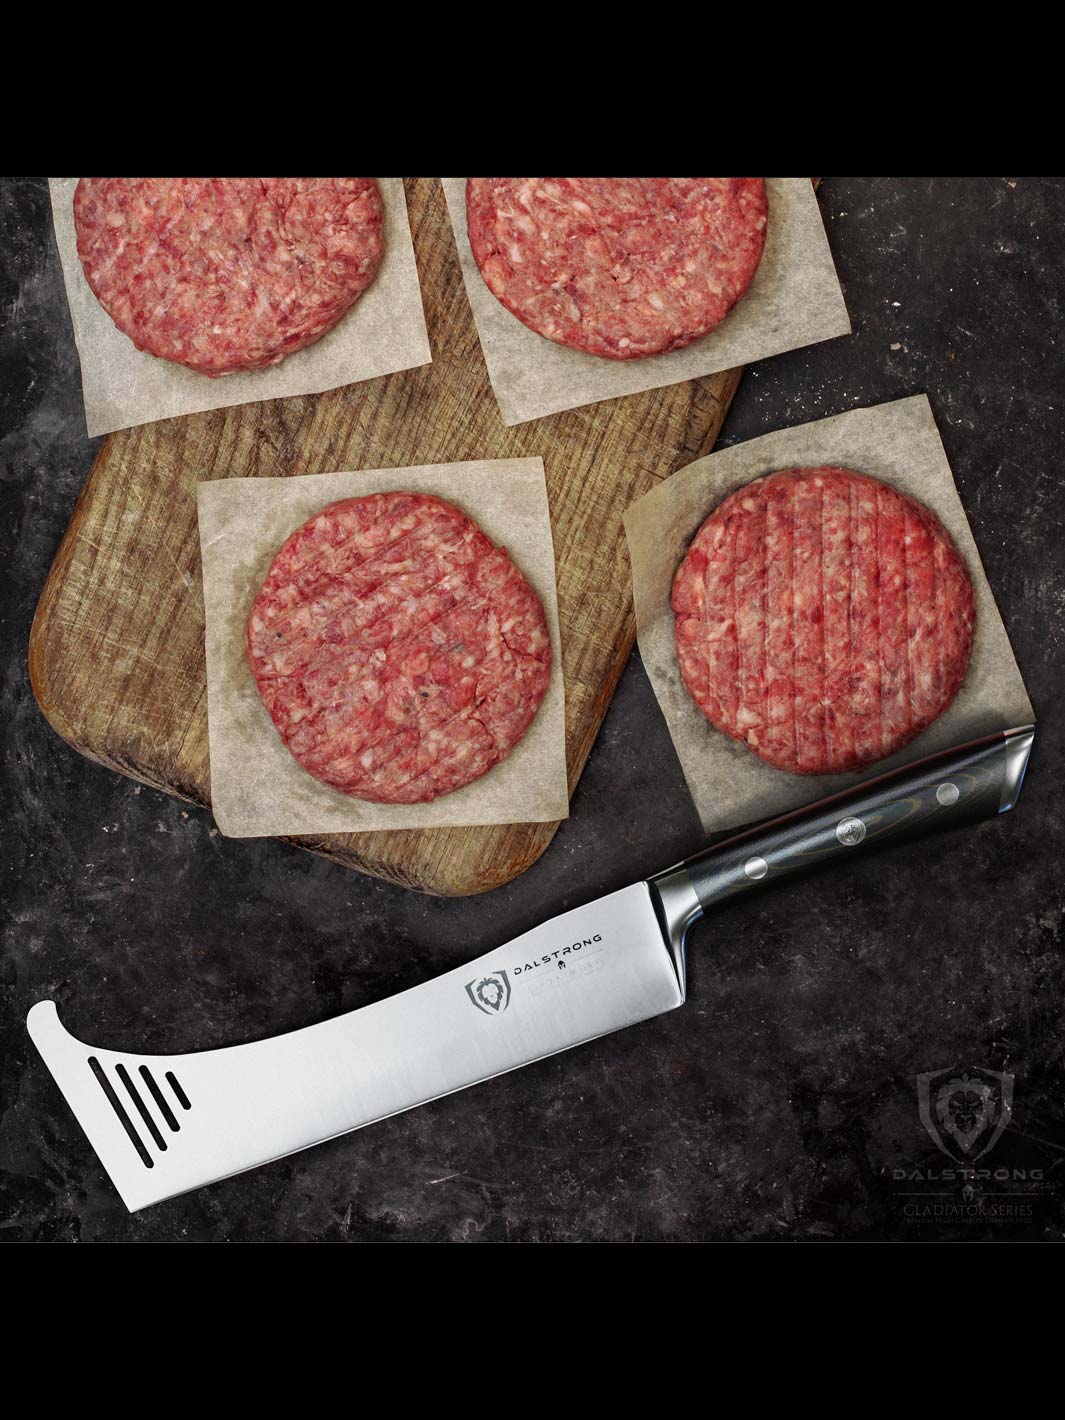 Dalstrong gladiator series 8 inch spatula knife with black handle and four hamburger patties on a wooden board.